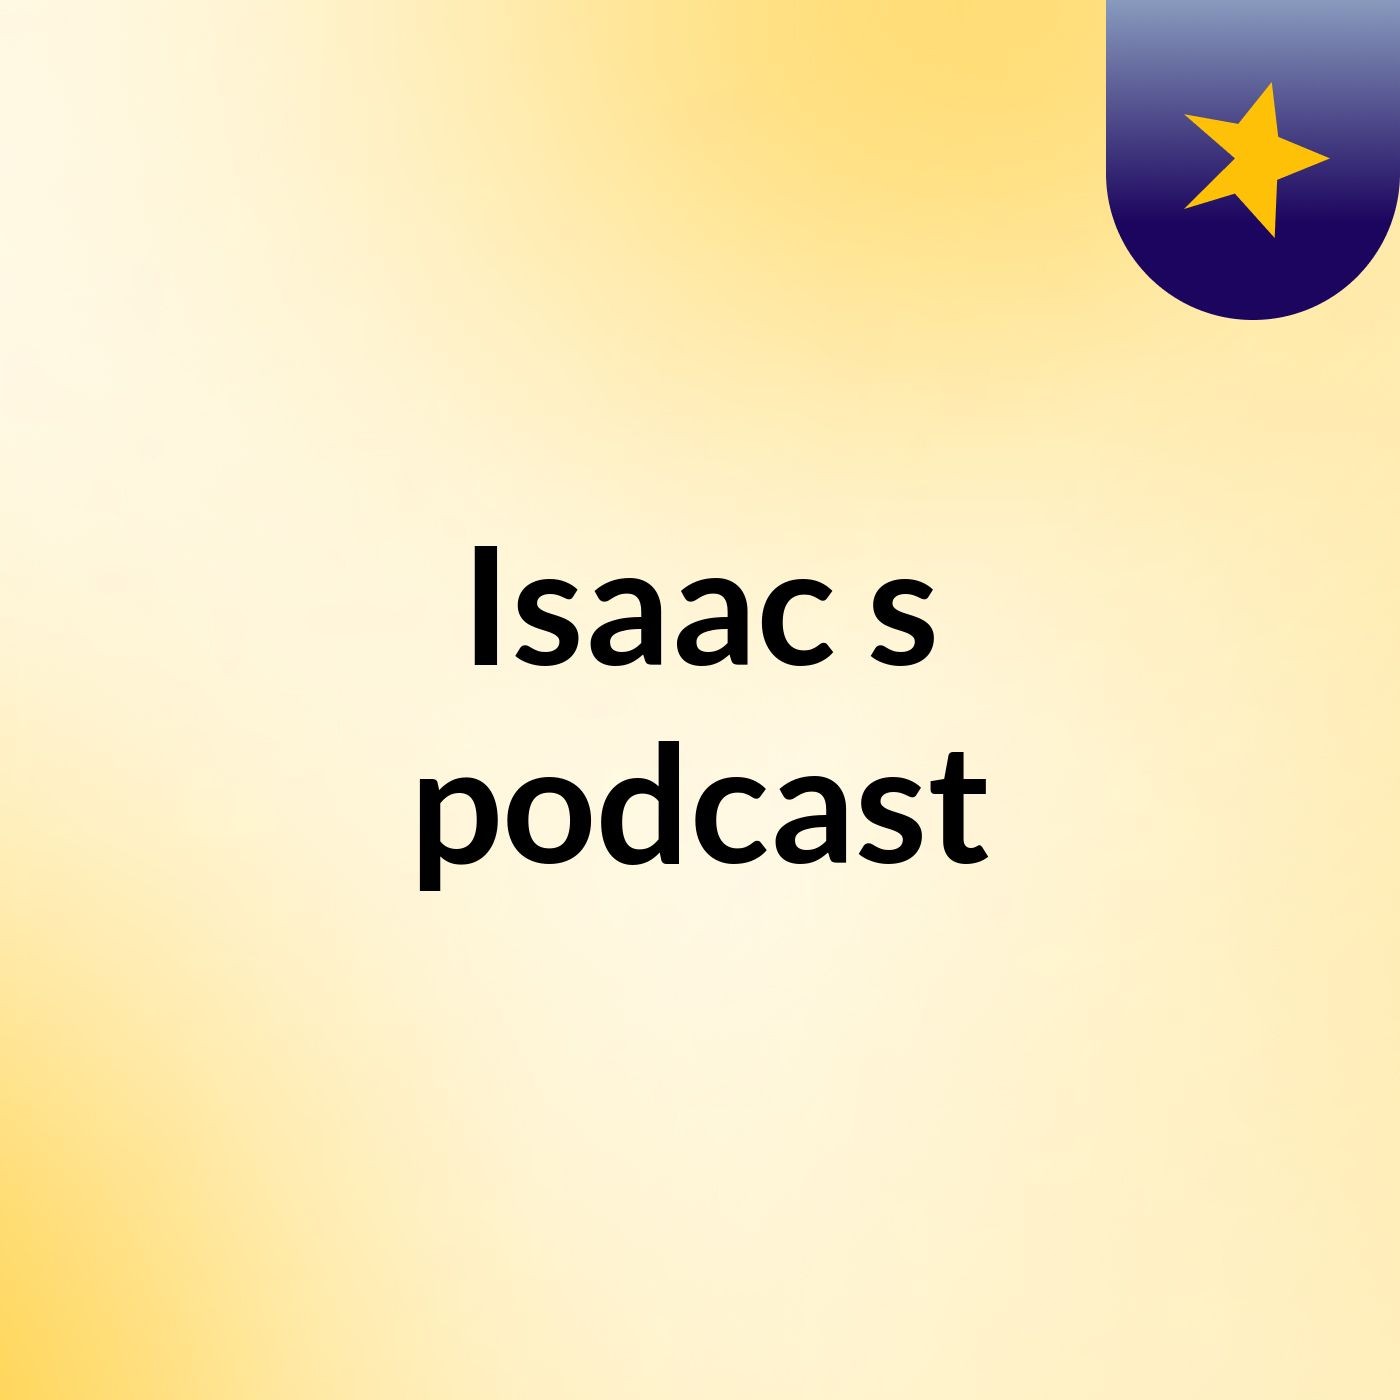 Episode 2 - Isaac's podcast